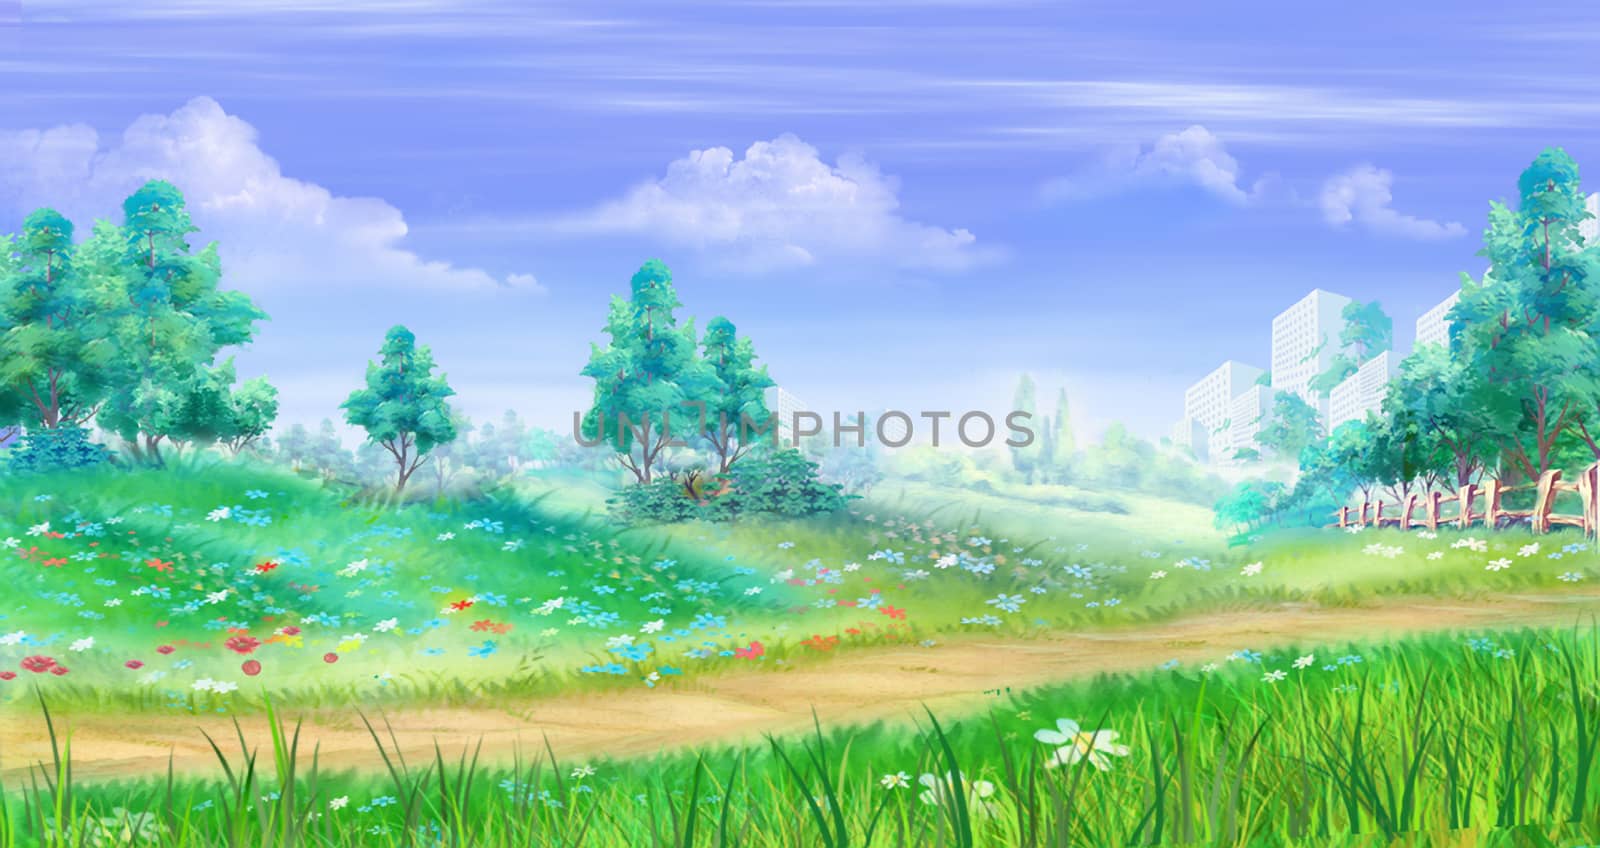 Rural Landscape with Flowers and Grass Around a Path by Multipedia